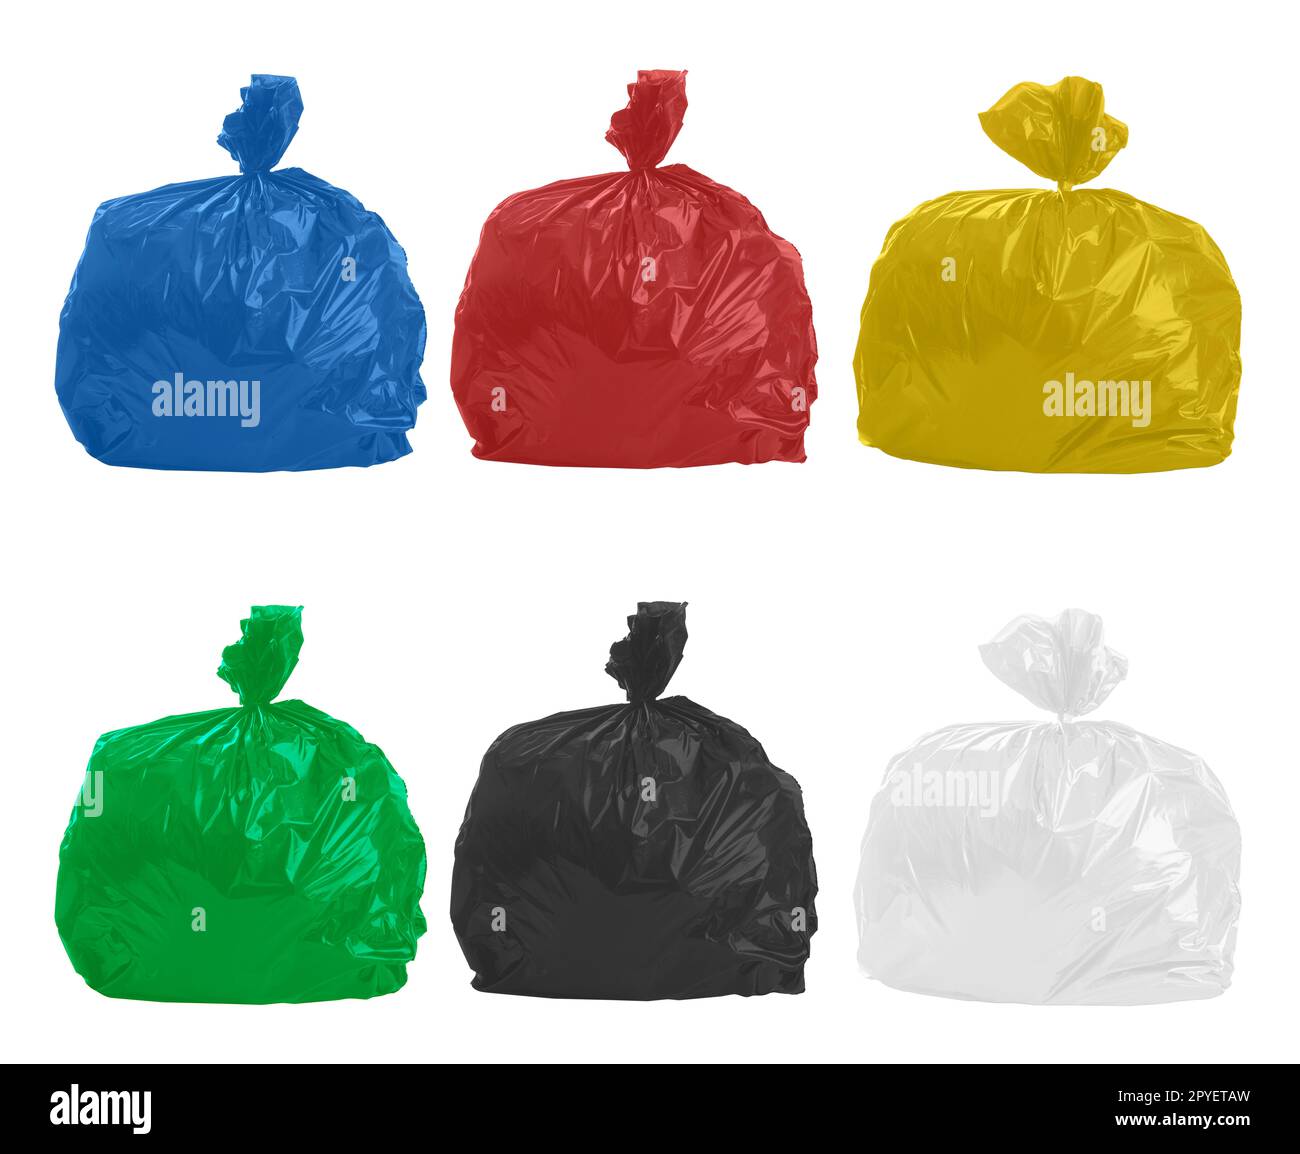 Garbage bags of different colors for separate collection. Stock Photo